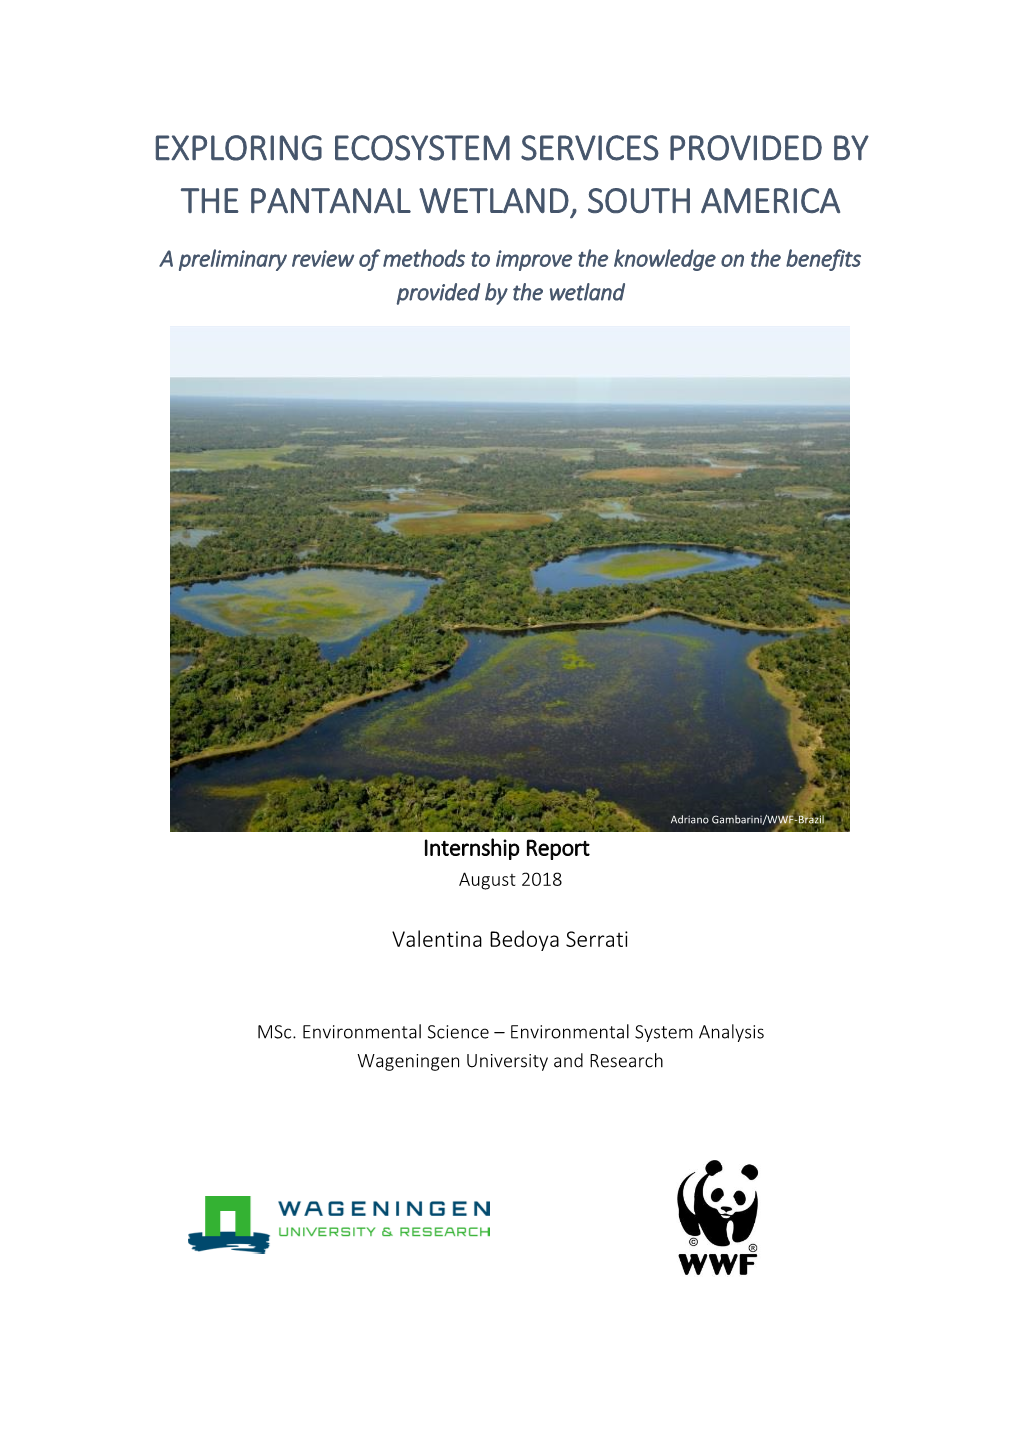 Exploring Ecosystem Services Provided by the Pantanal Wetland, South America